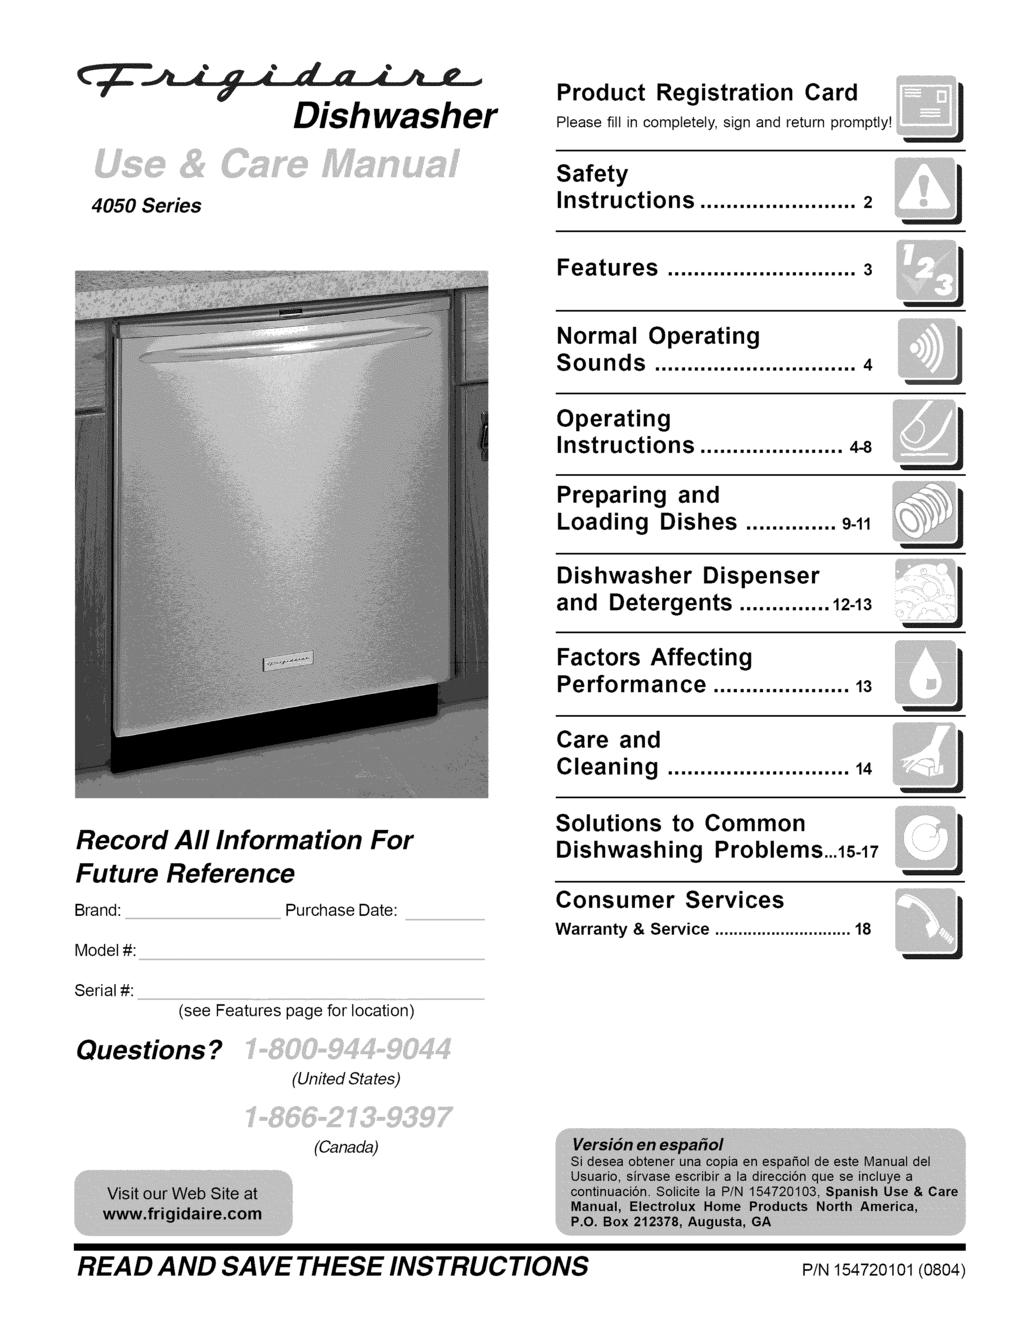 Dishwasher Product Registration Card Please fill in completely, sign and return promptly! 4050 Series Safety Instructions... 2 Features... 3 Normal Operating Sounds... 4 Operating Instructions.